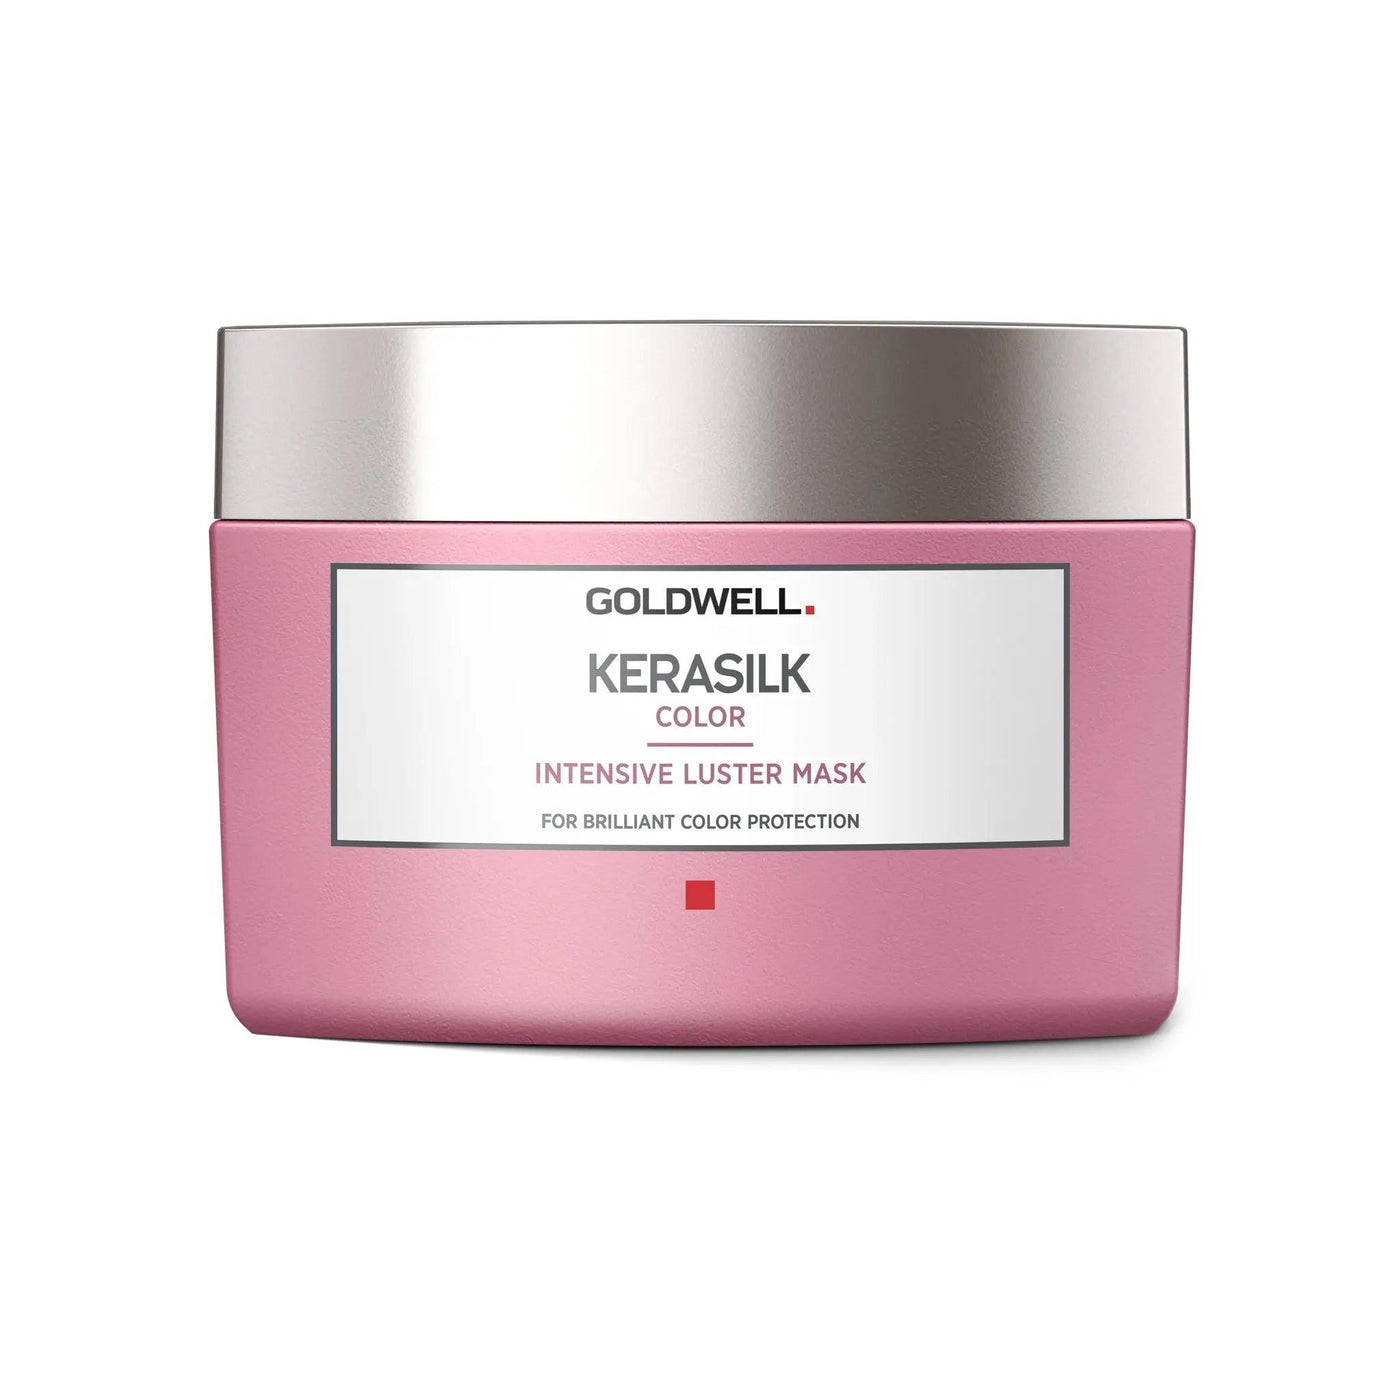 Goldwell Kerasilk Color Intensive Luster Mask Goldwell Boutique Deauville